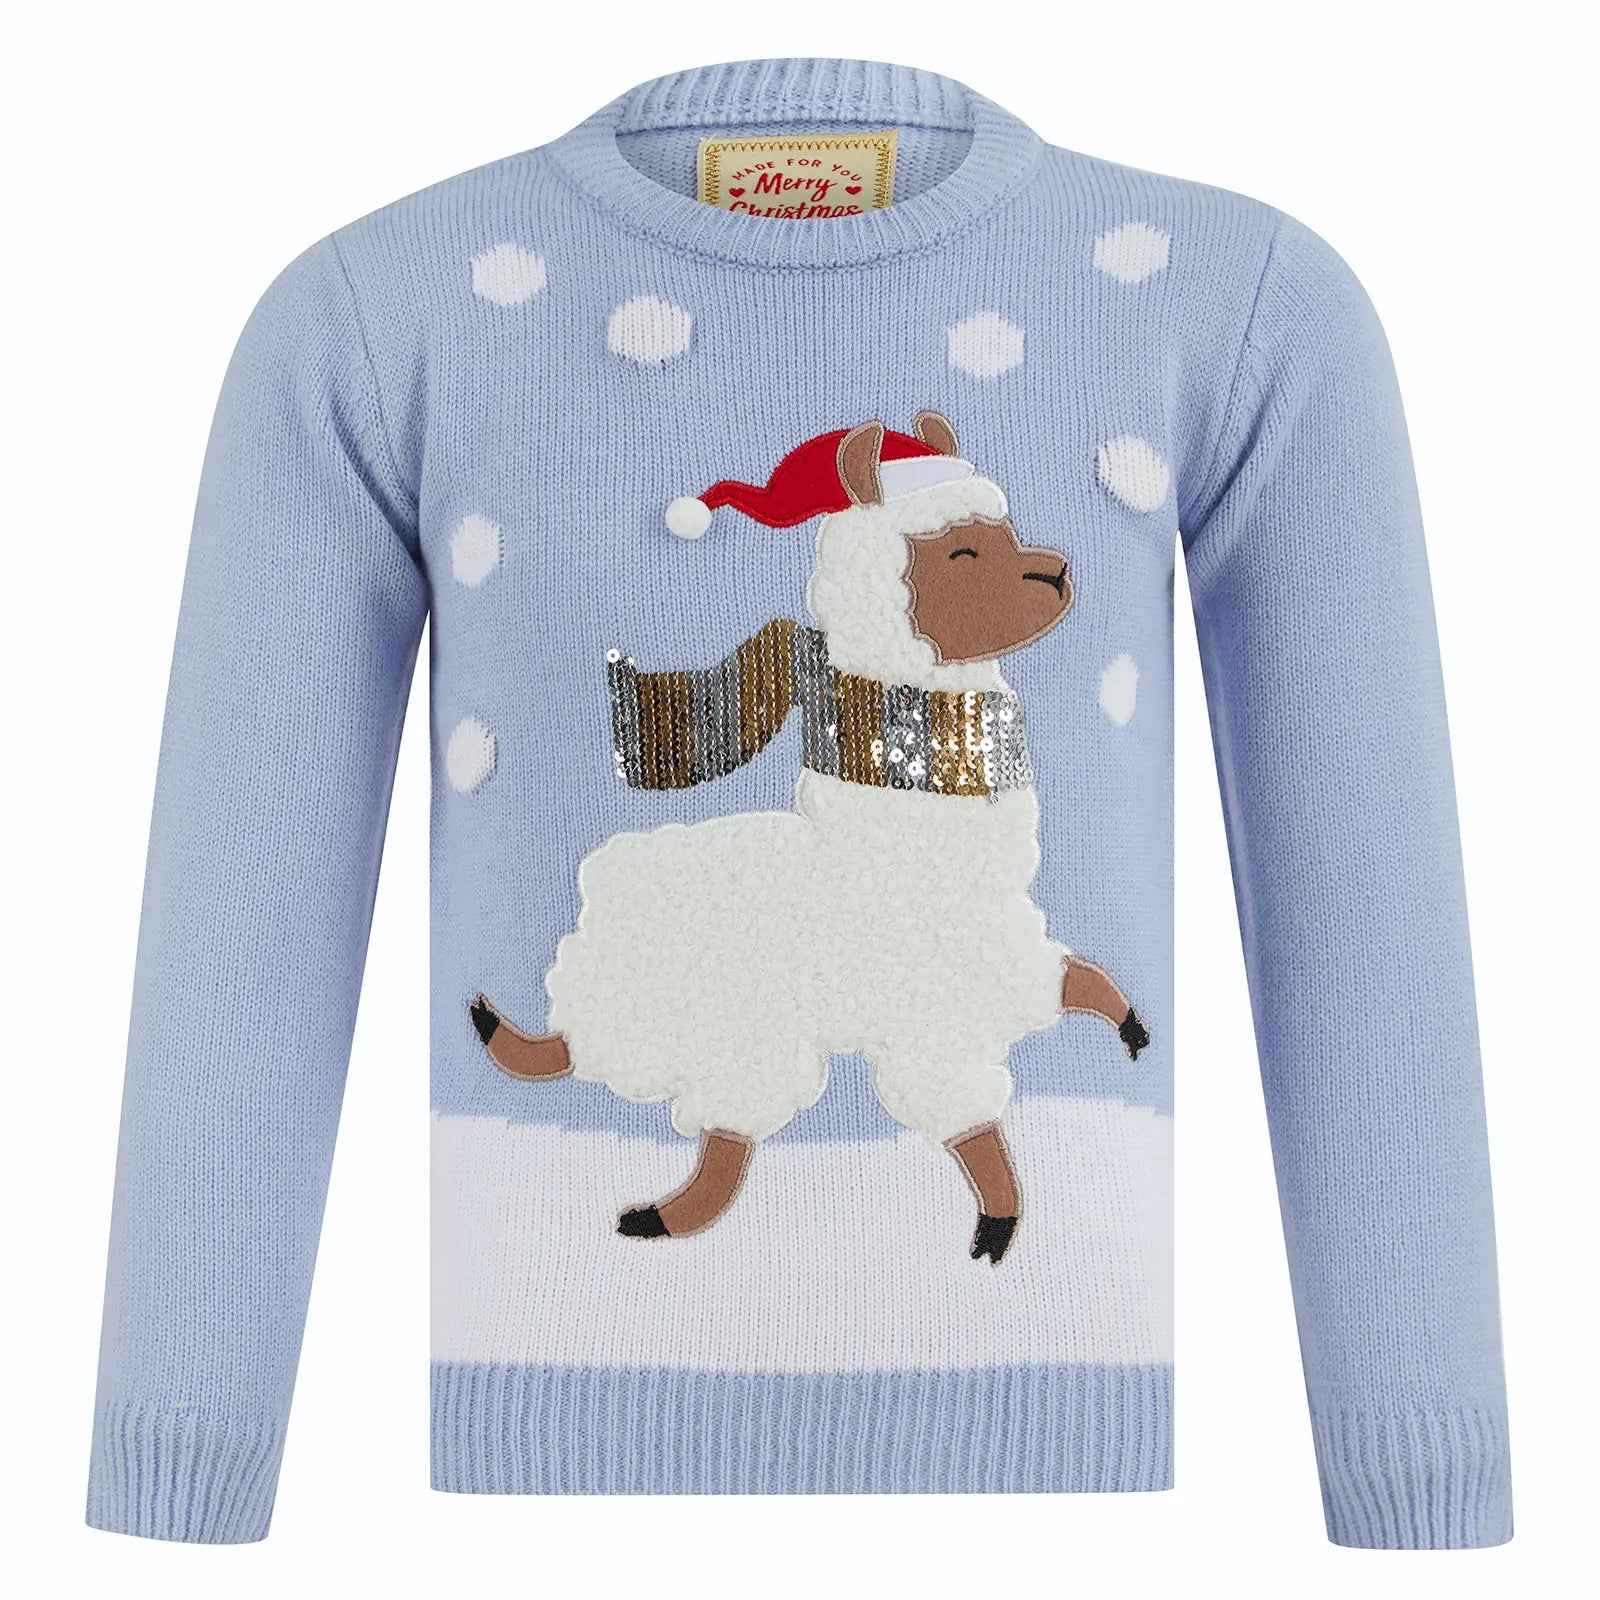 blue christmas jumper featuring llama character with fleece body, silver and gold sequin scarf and santa hat